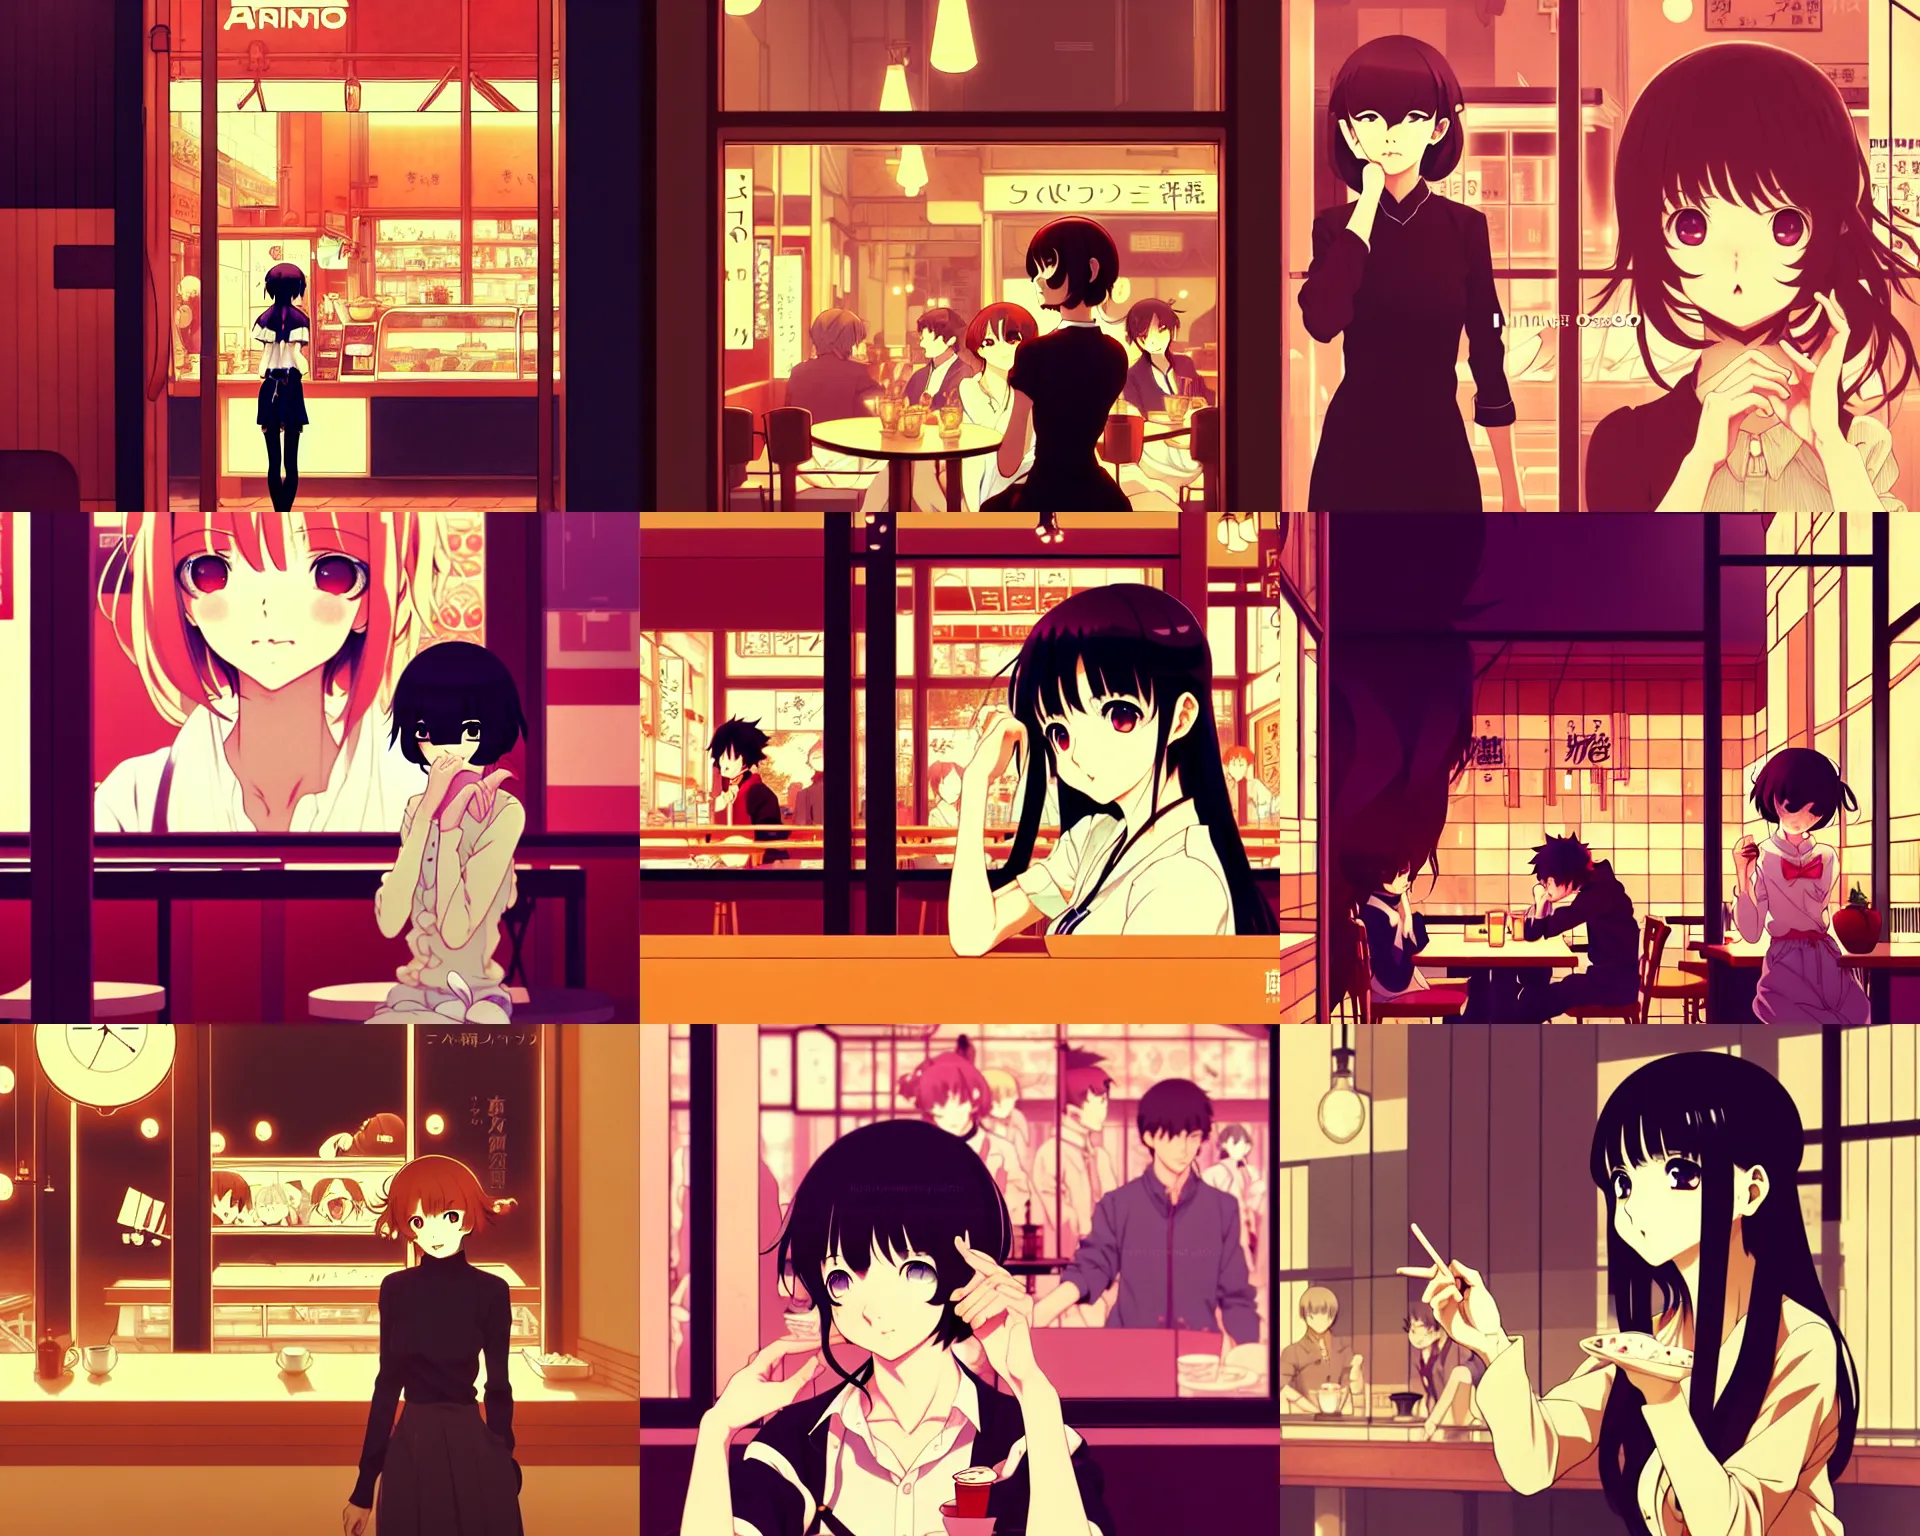 Prompt: anime frames, anime visual, portrait of a portrait of a young woman visiting a busy cafe interior at night, cute face by ilya kuvshinov and yoh yoshinari, katsura masakazu, mucha, dynamic pose, dynamic perspective, strong silhouette, anime cels, rounded eyes, smooth facial features